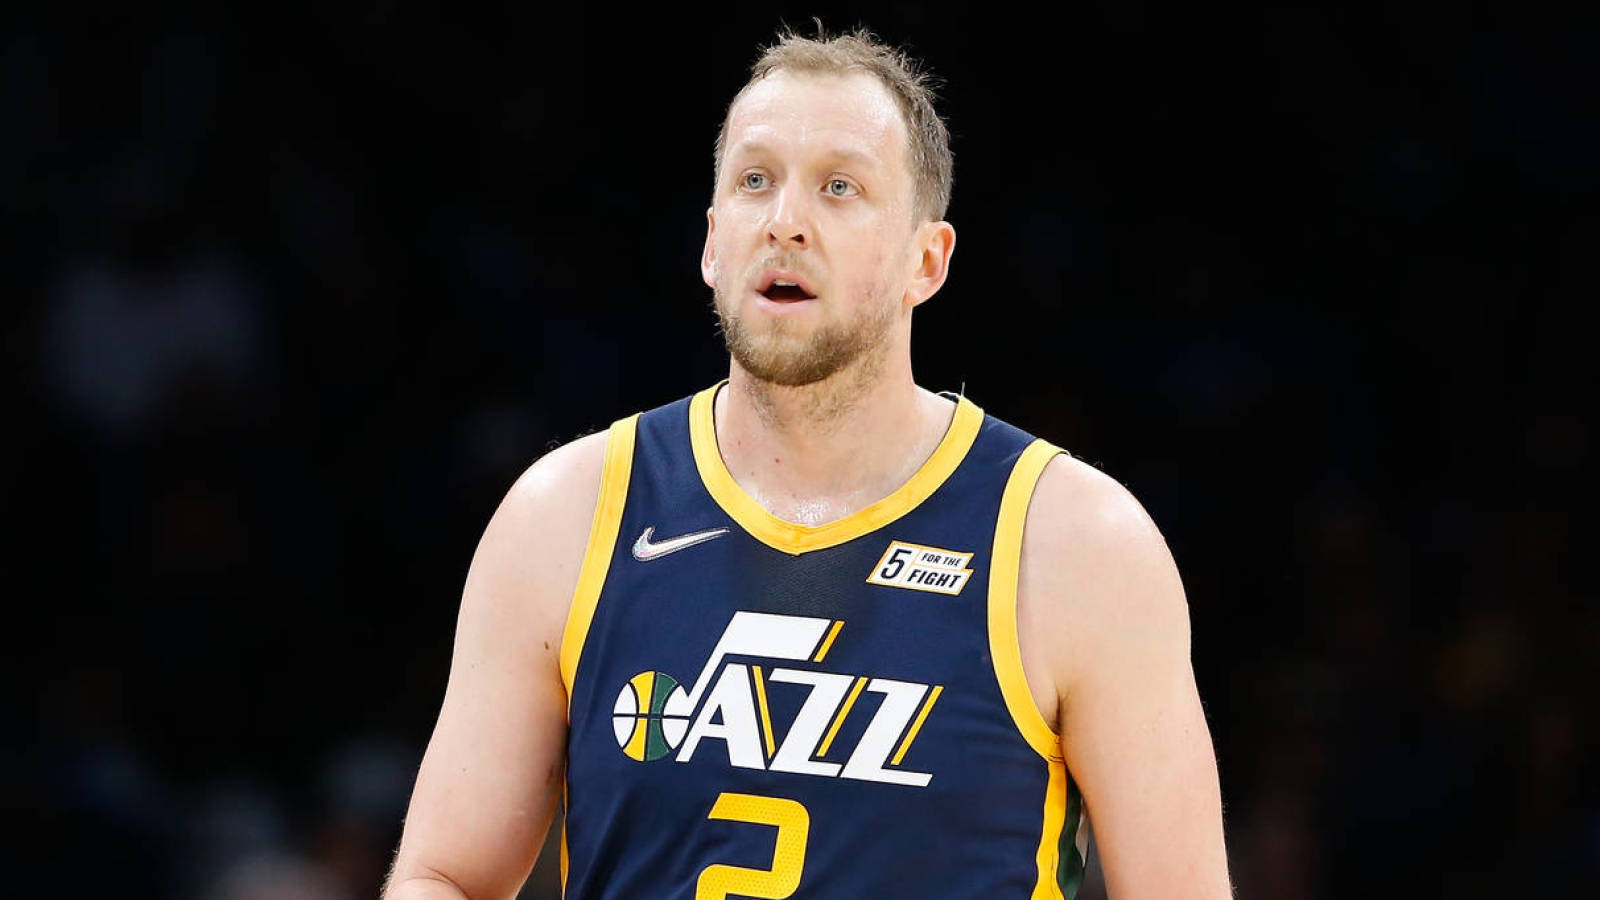 Report: Joe Ingles suffers torn ACL, out for season